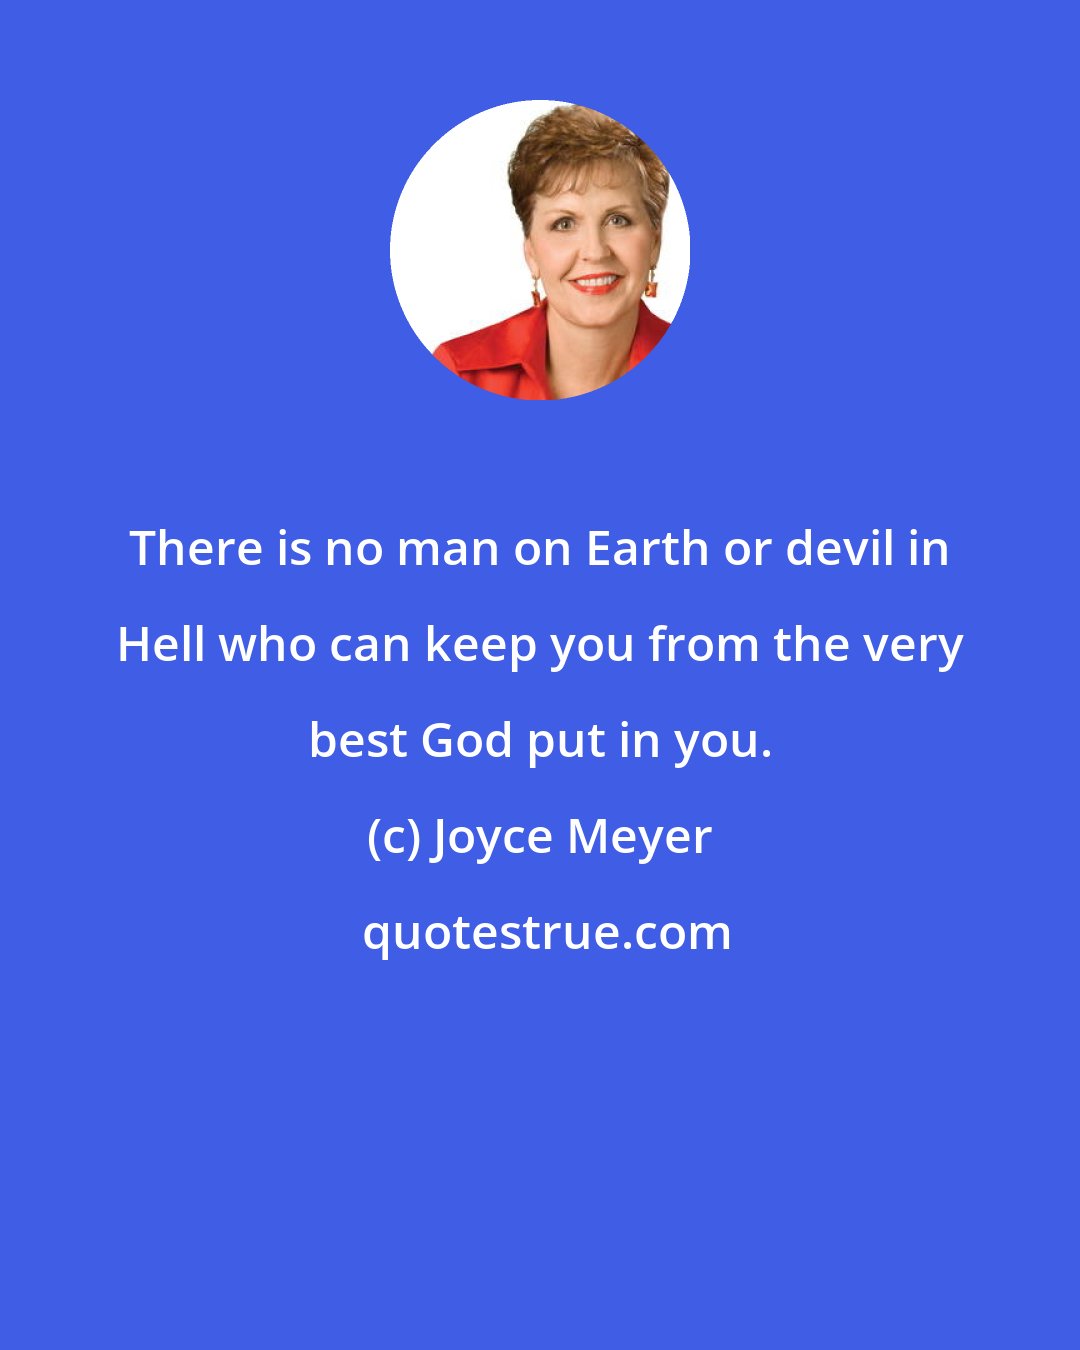 Joyce Meyer: There is no man on Earth or devil in Hell who can keep you from the very best God put in you.